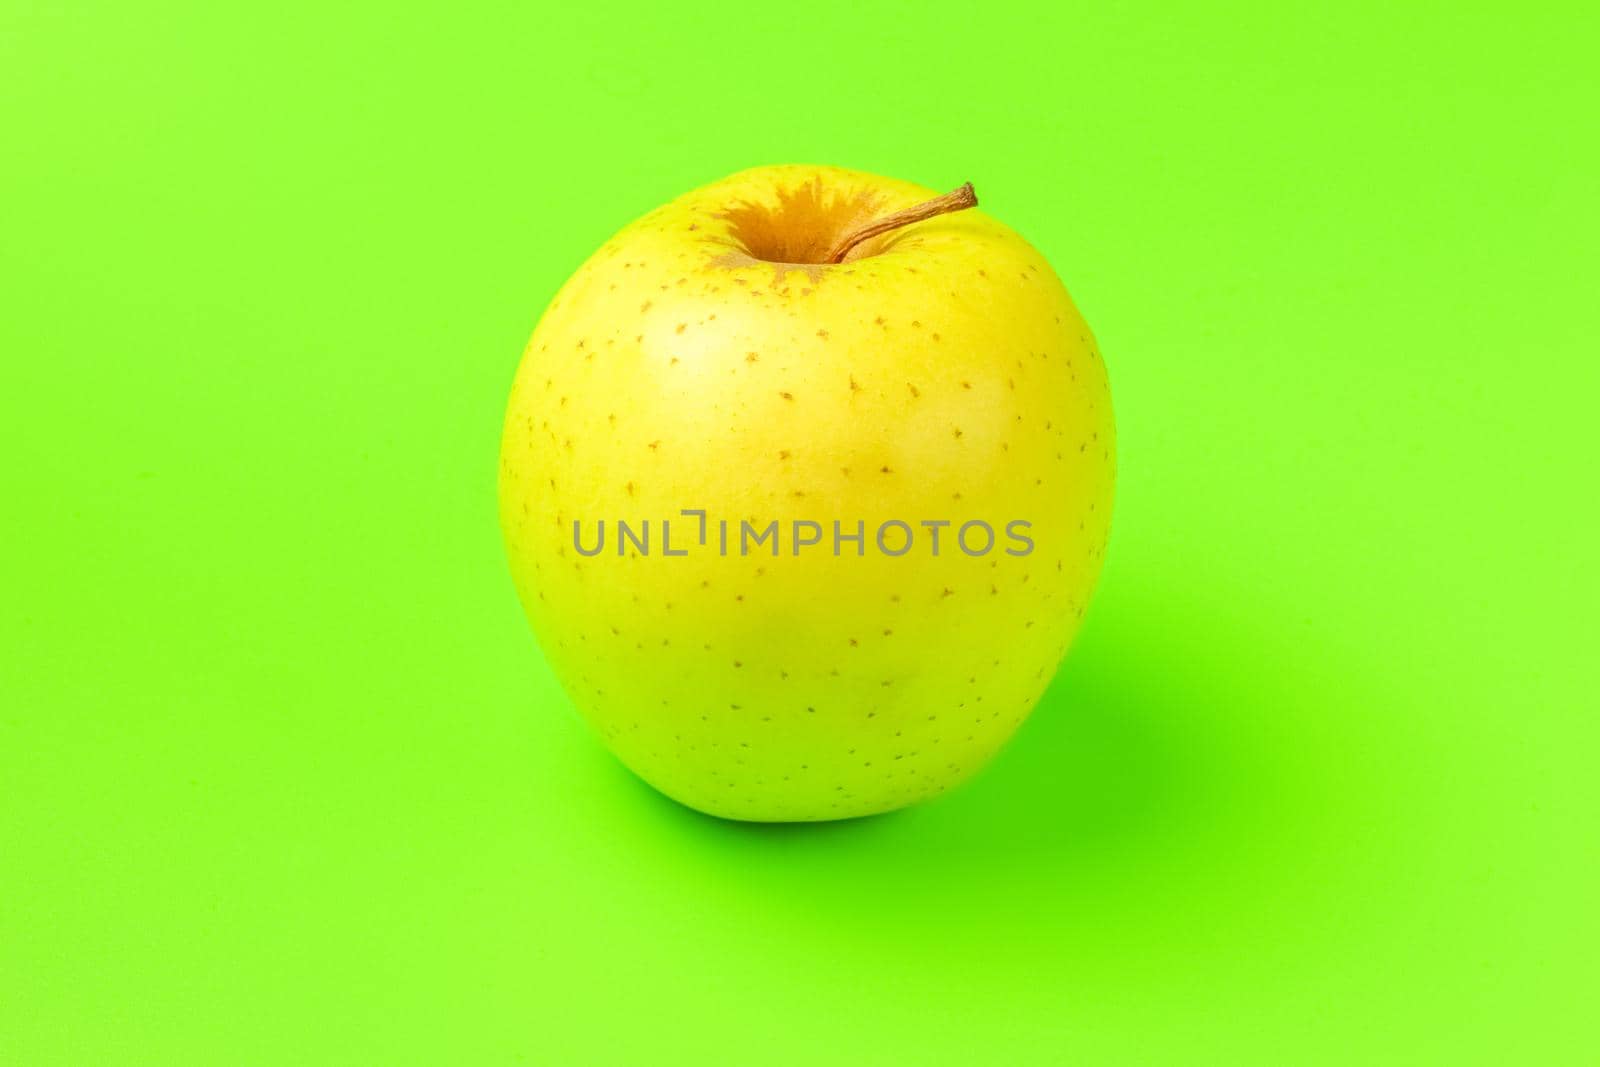 yellow Apple on a green background close-up.isolate by roman112007